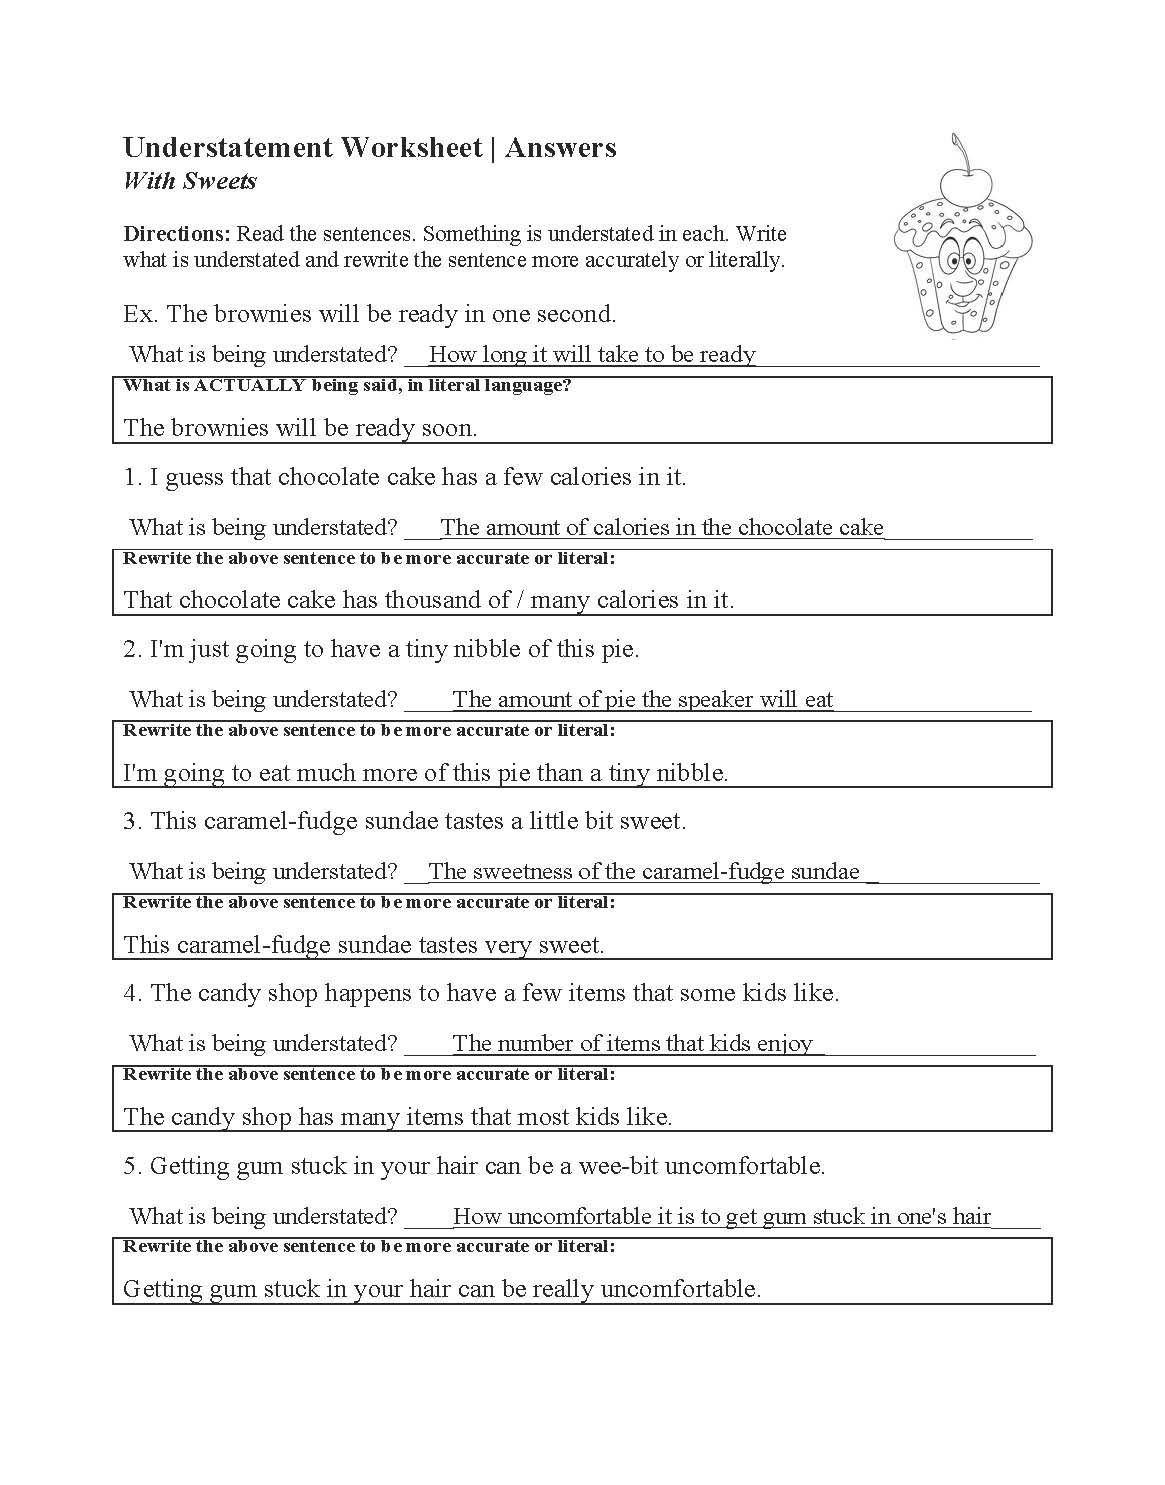 This is a preview image of our Understatement Worksheet. Click on it to enlarge or view the source file.